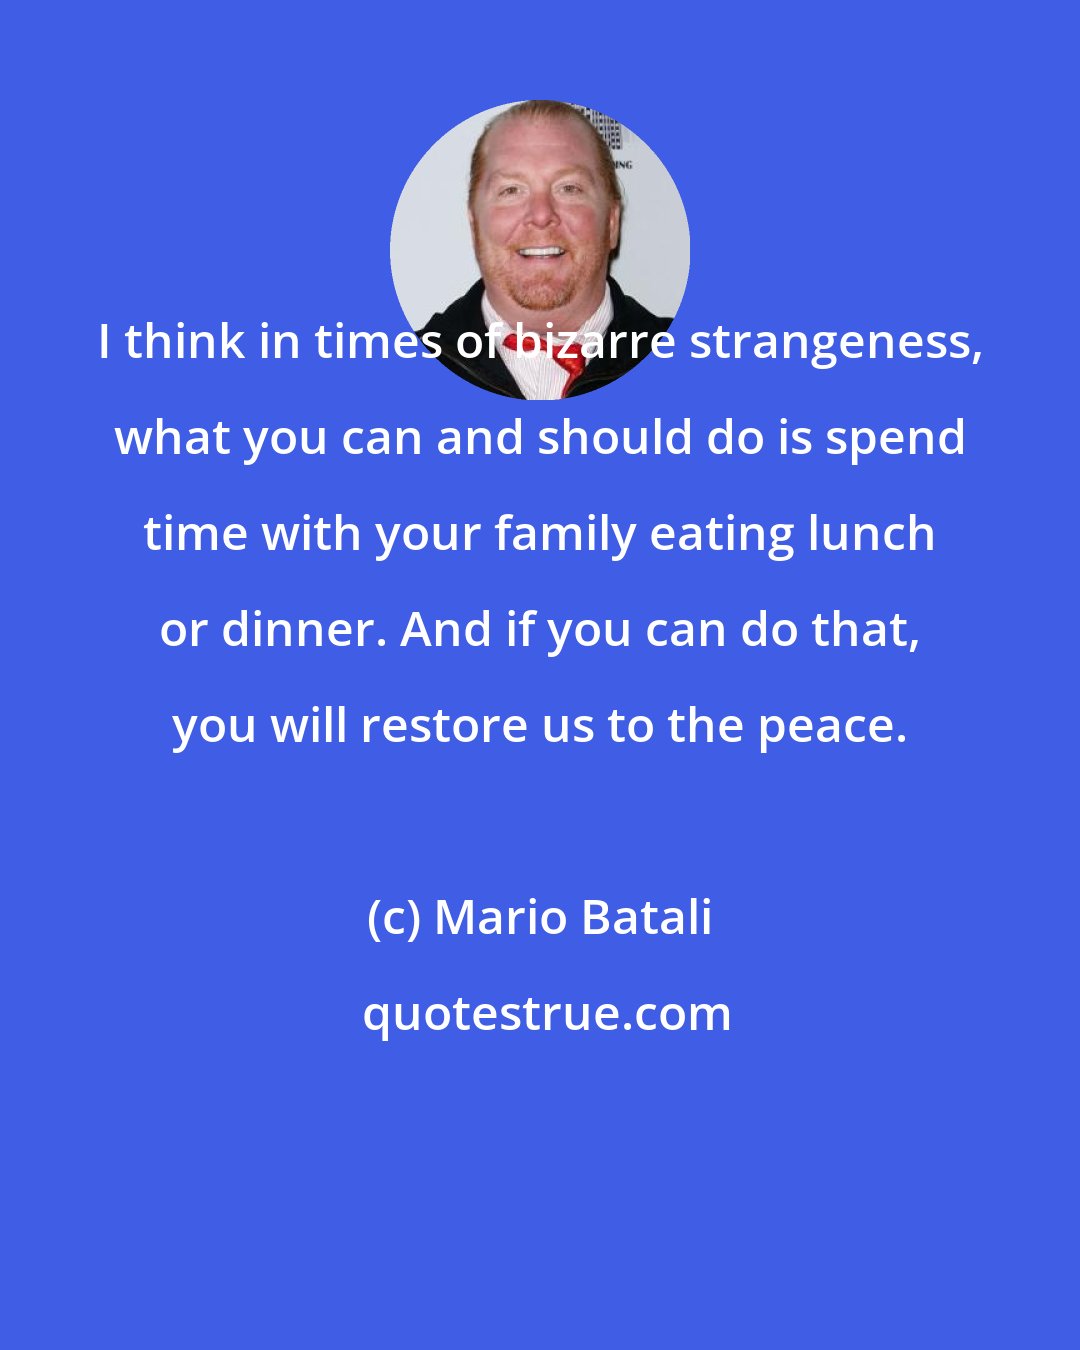 Mario Batali: I think in times of bizarre strangeness, what you can and should do is spend time with your family eating lunch or dinner. And if you can do that, you will restore us to the peace.